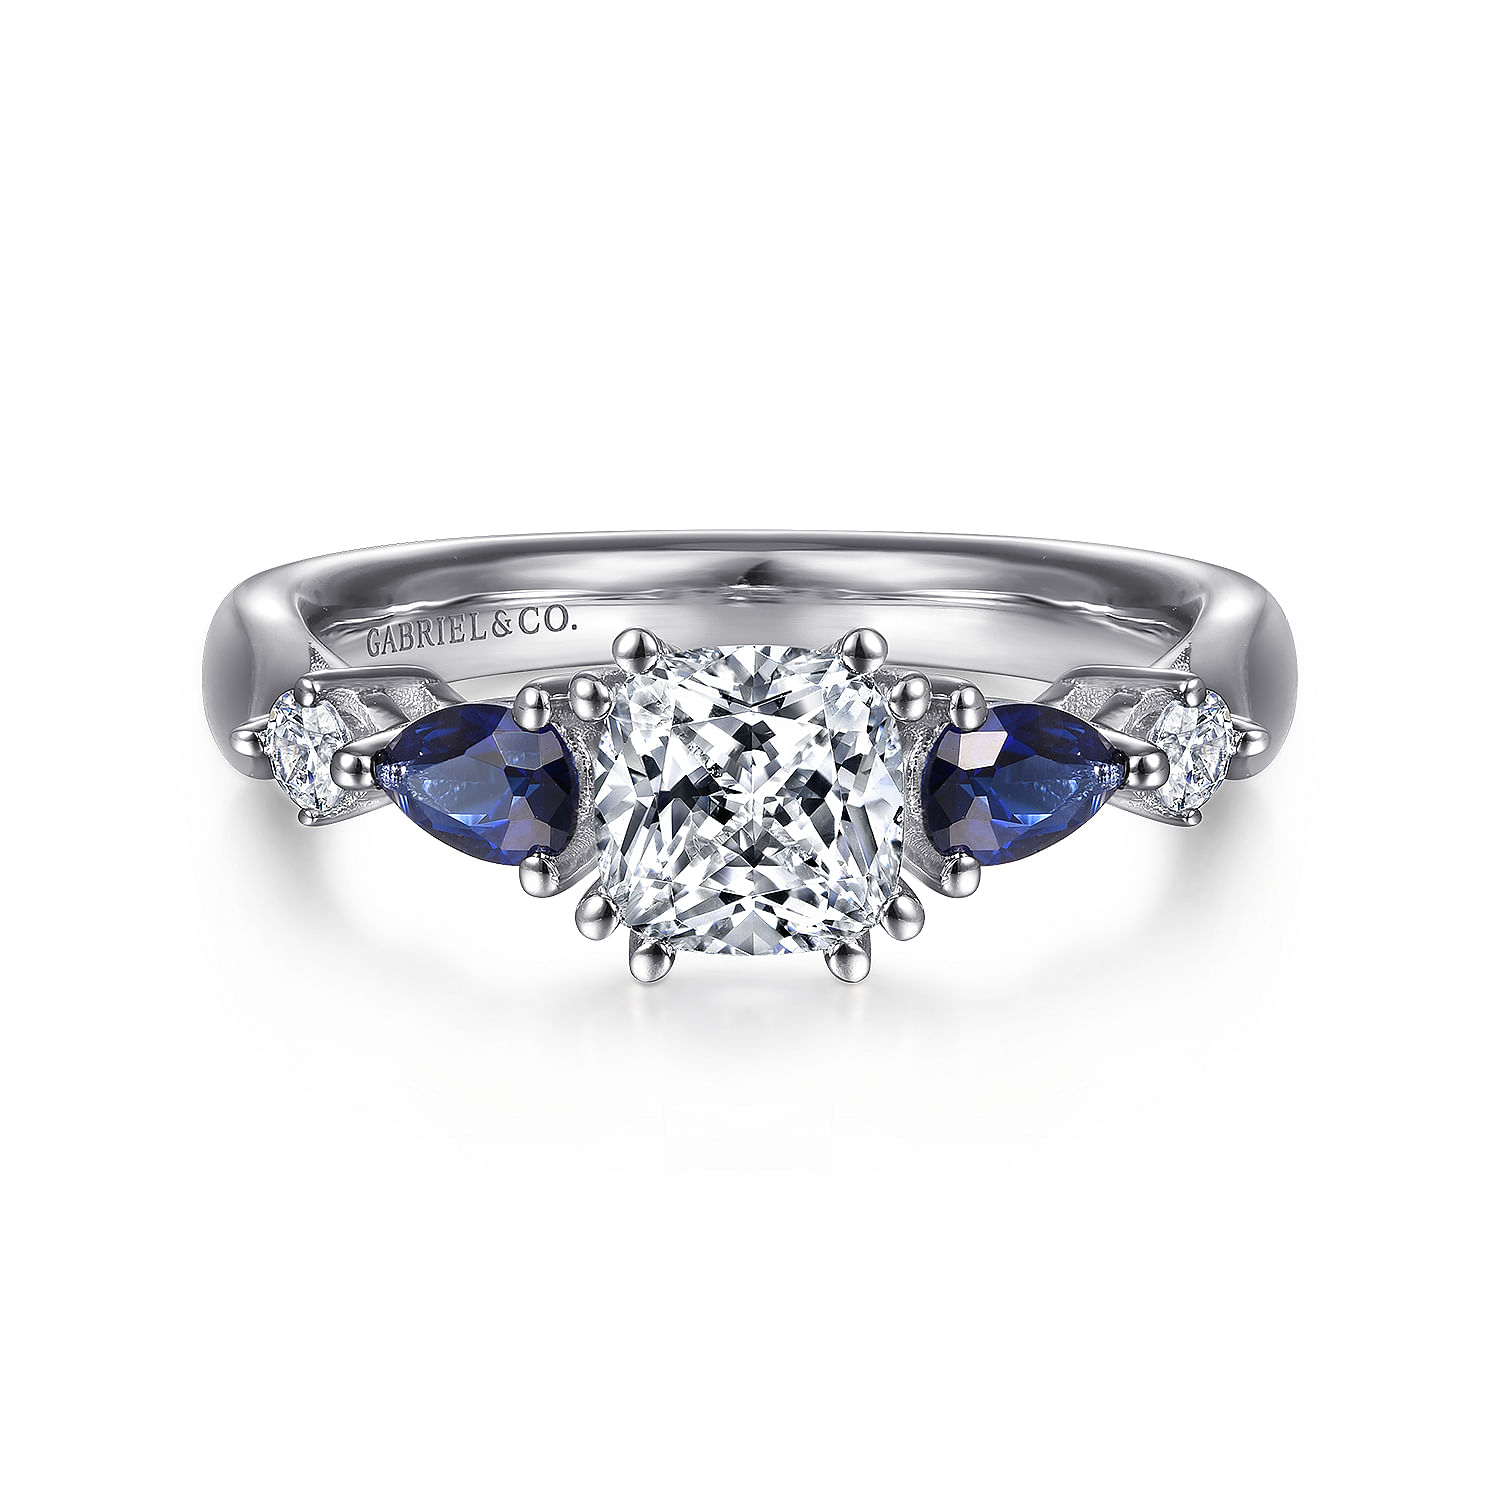 14K White Gold Cushion Cut Five Stone Sapphire and Diamond Engagement Ring